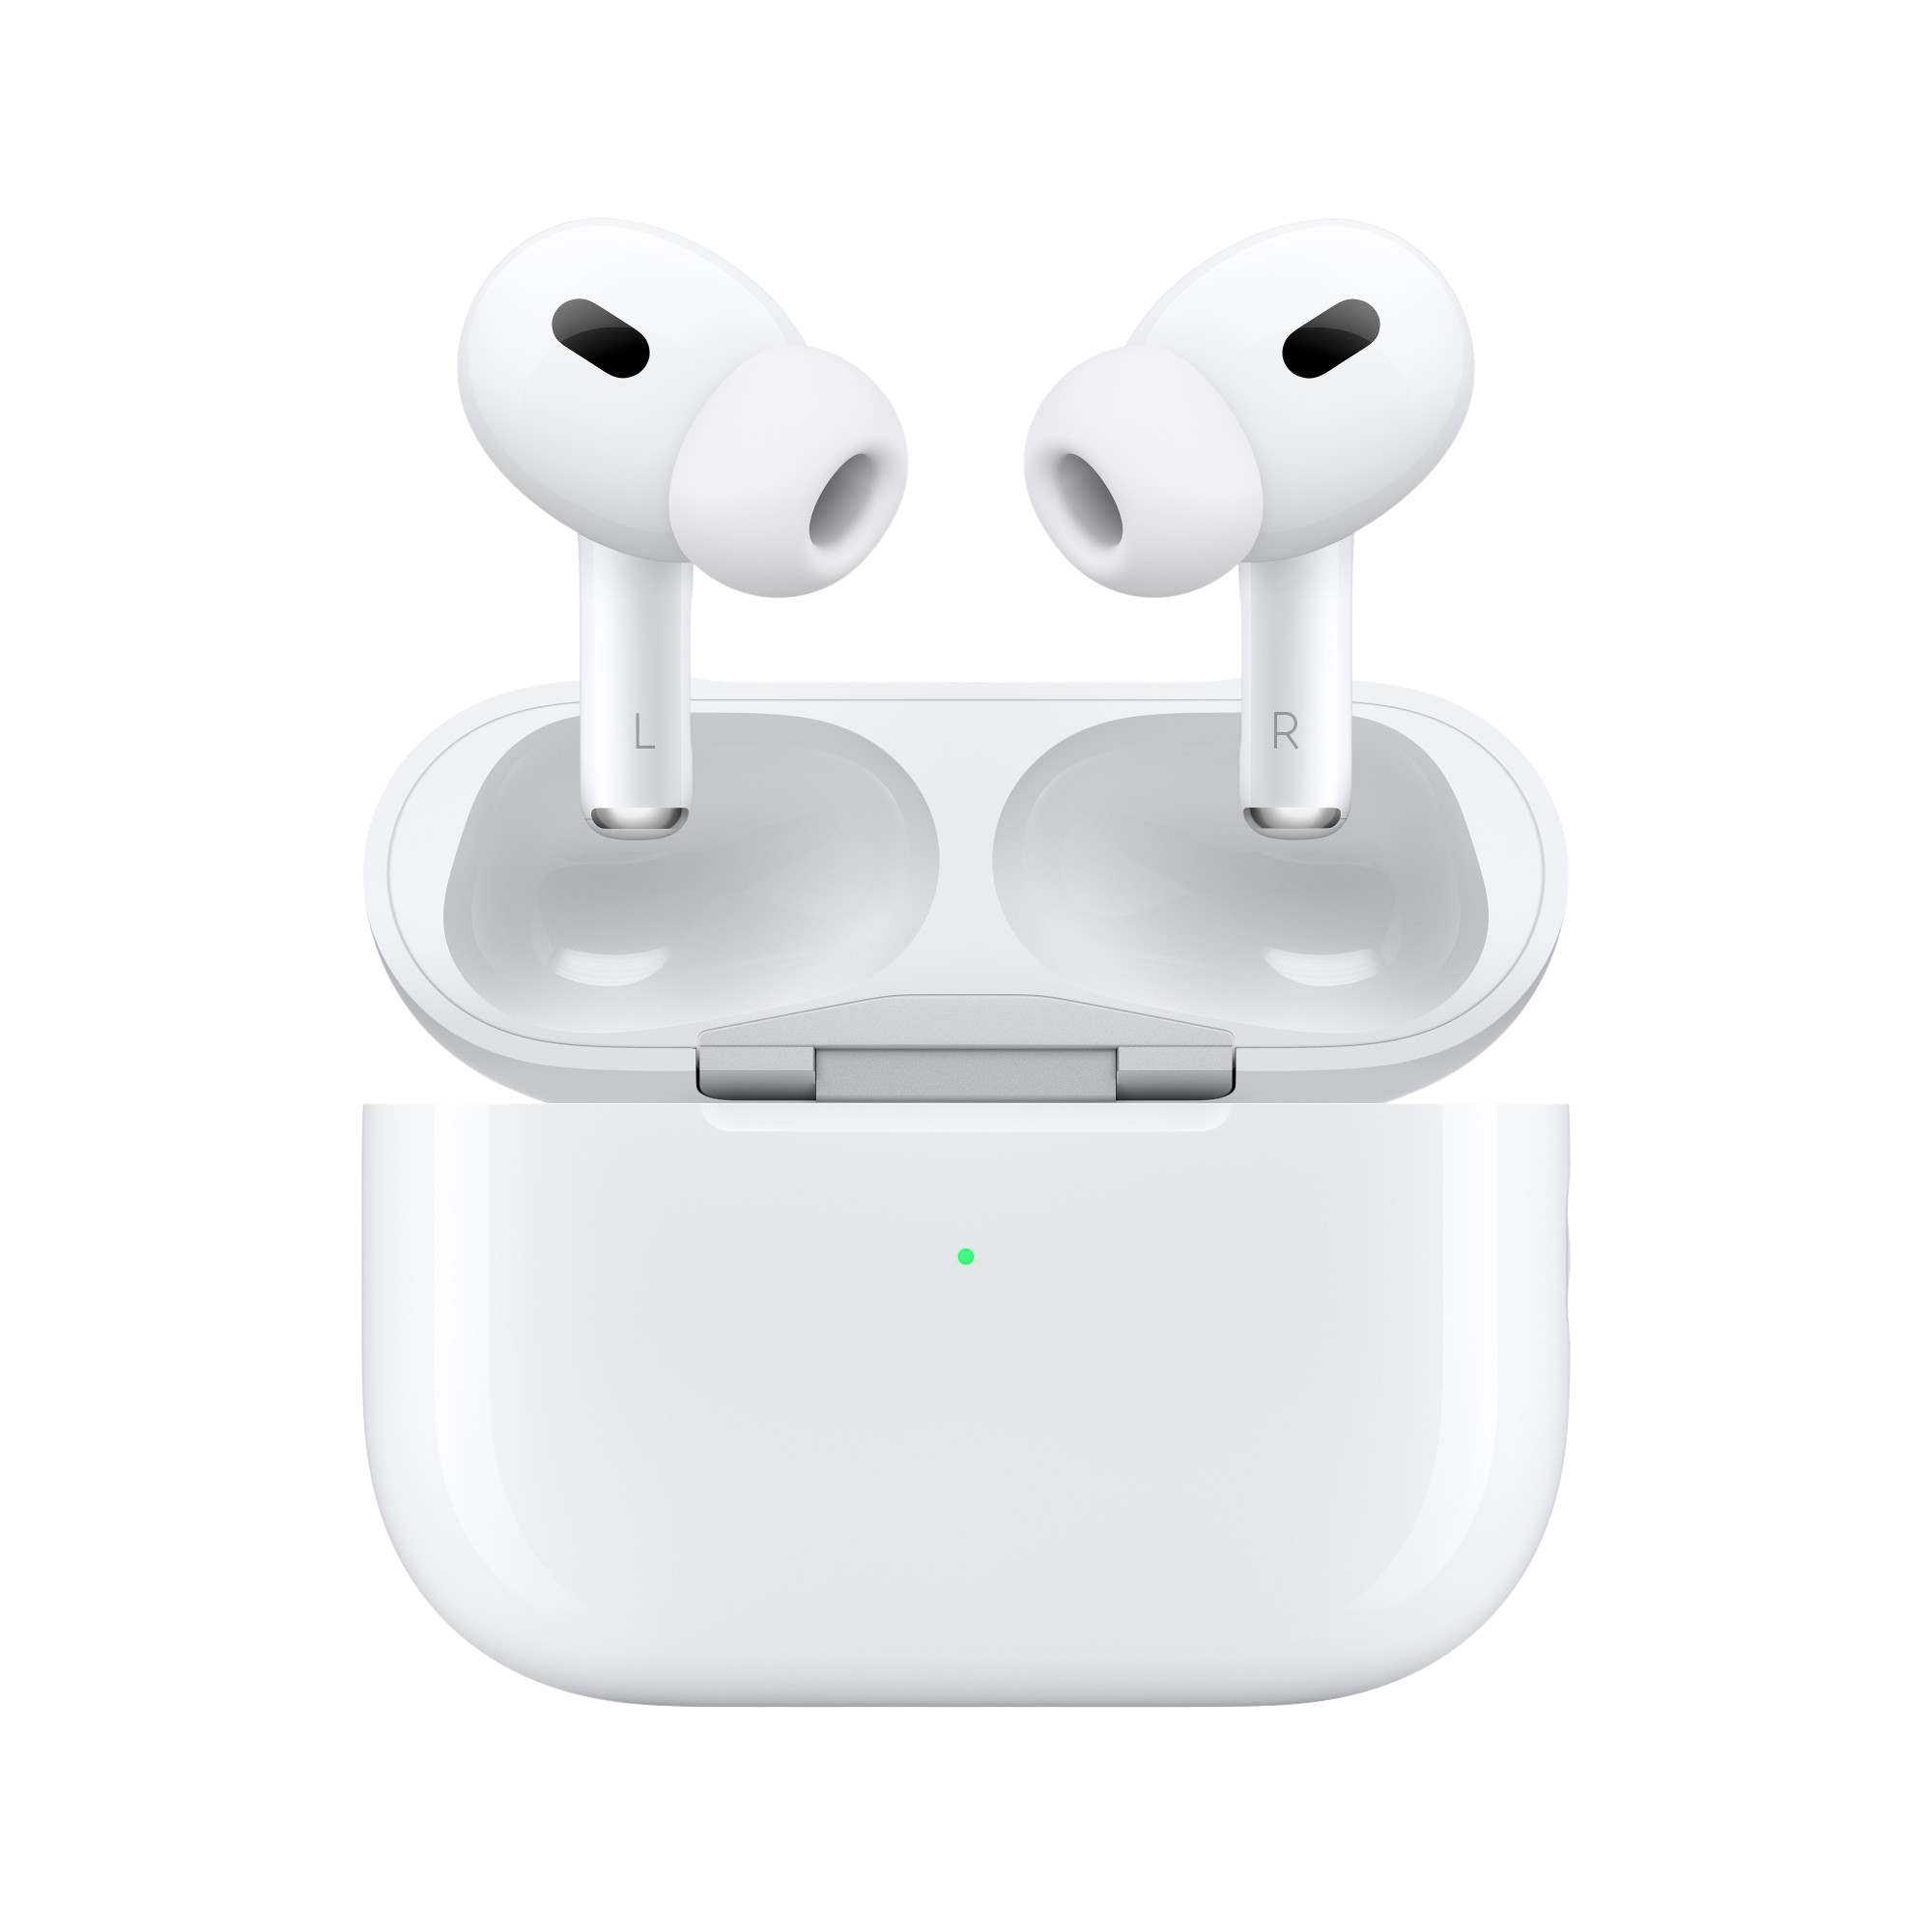 Rent Apple Airpods Pro 2 In-ear Bluetooth from $17.90 per month